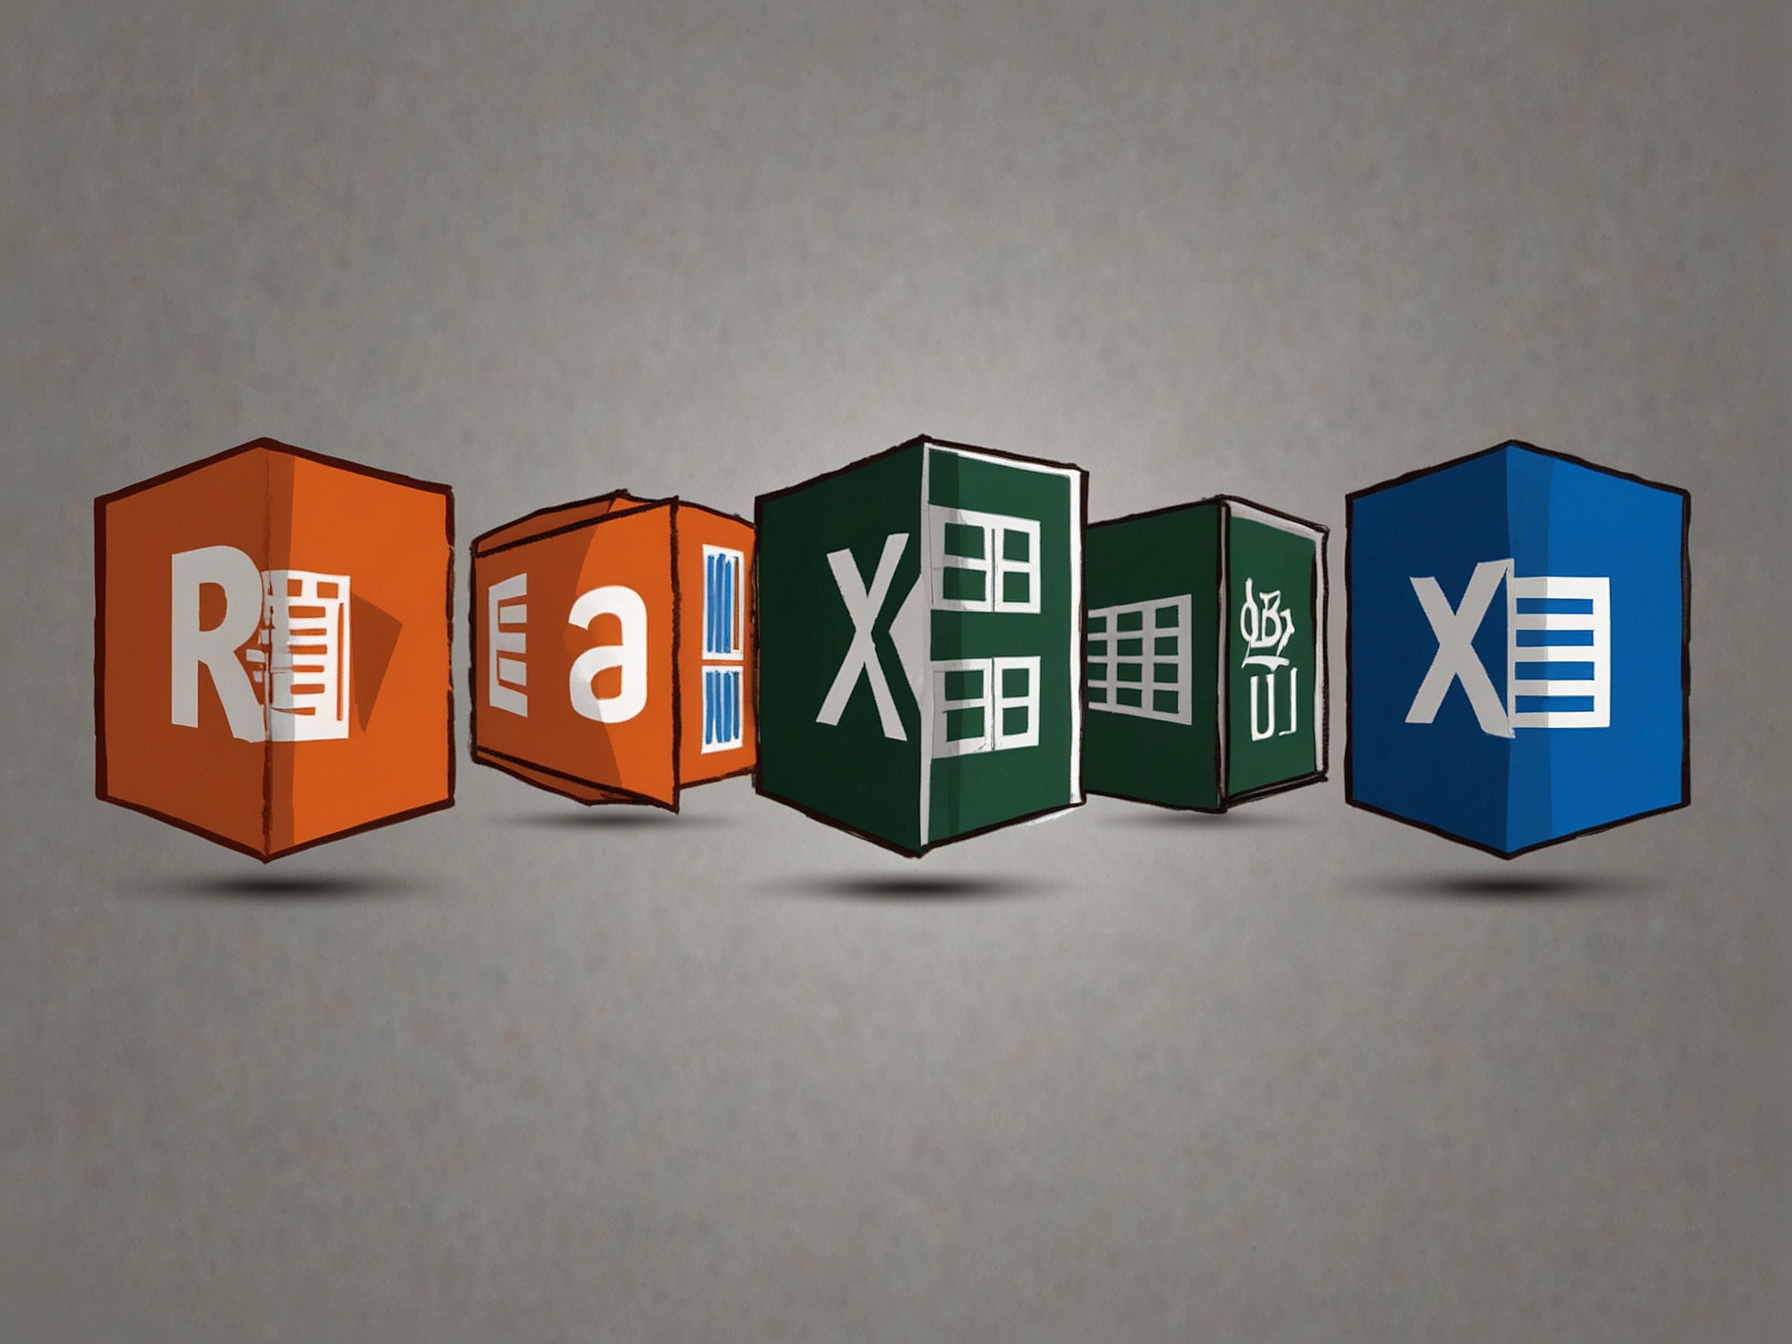 A graphic showing Teams app icons being merged with Microsoft Office icons such as Word and Excel, representing the controversial bundling practice under EU scrutiny.